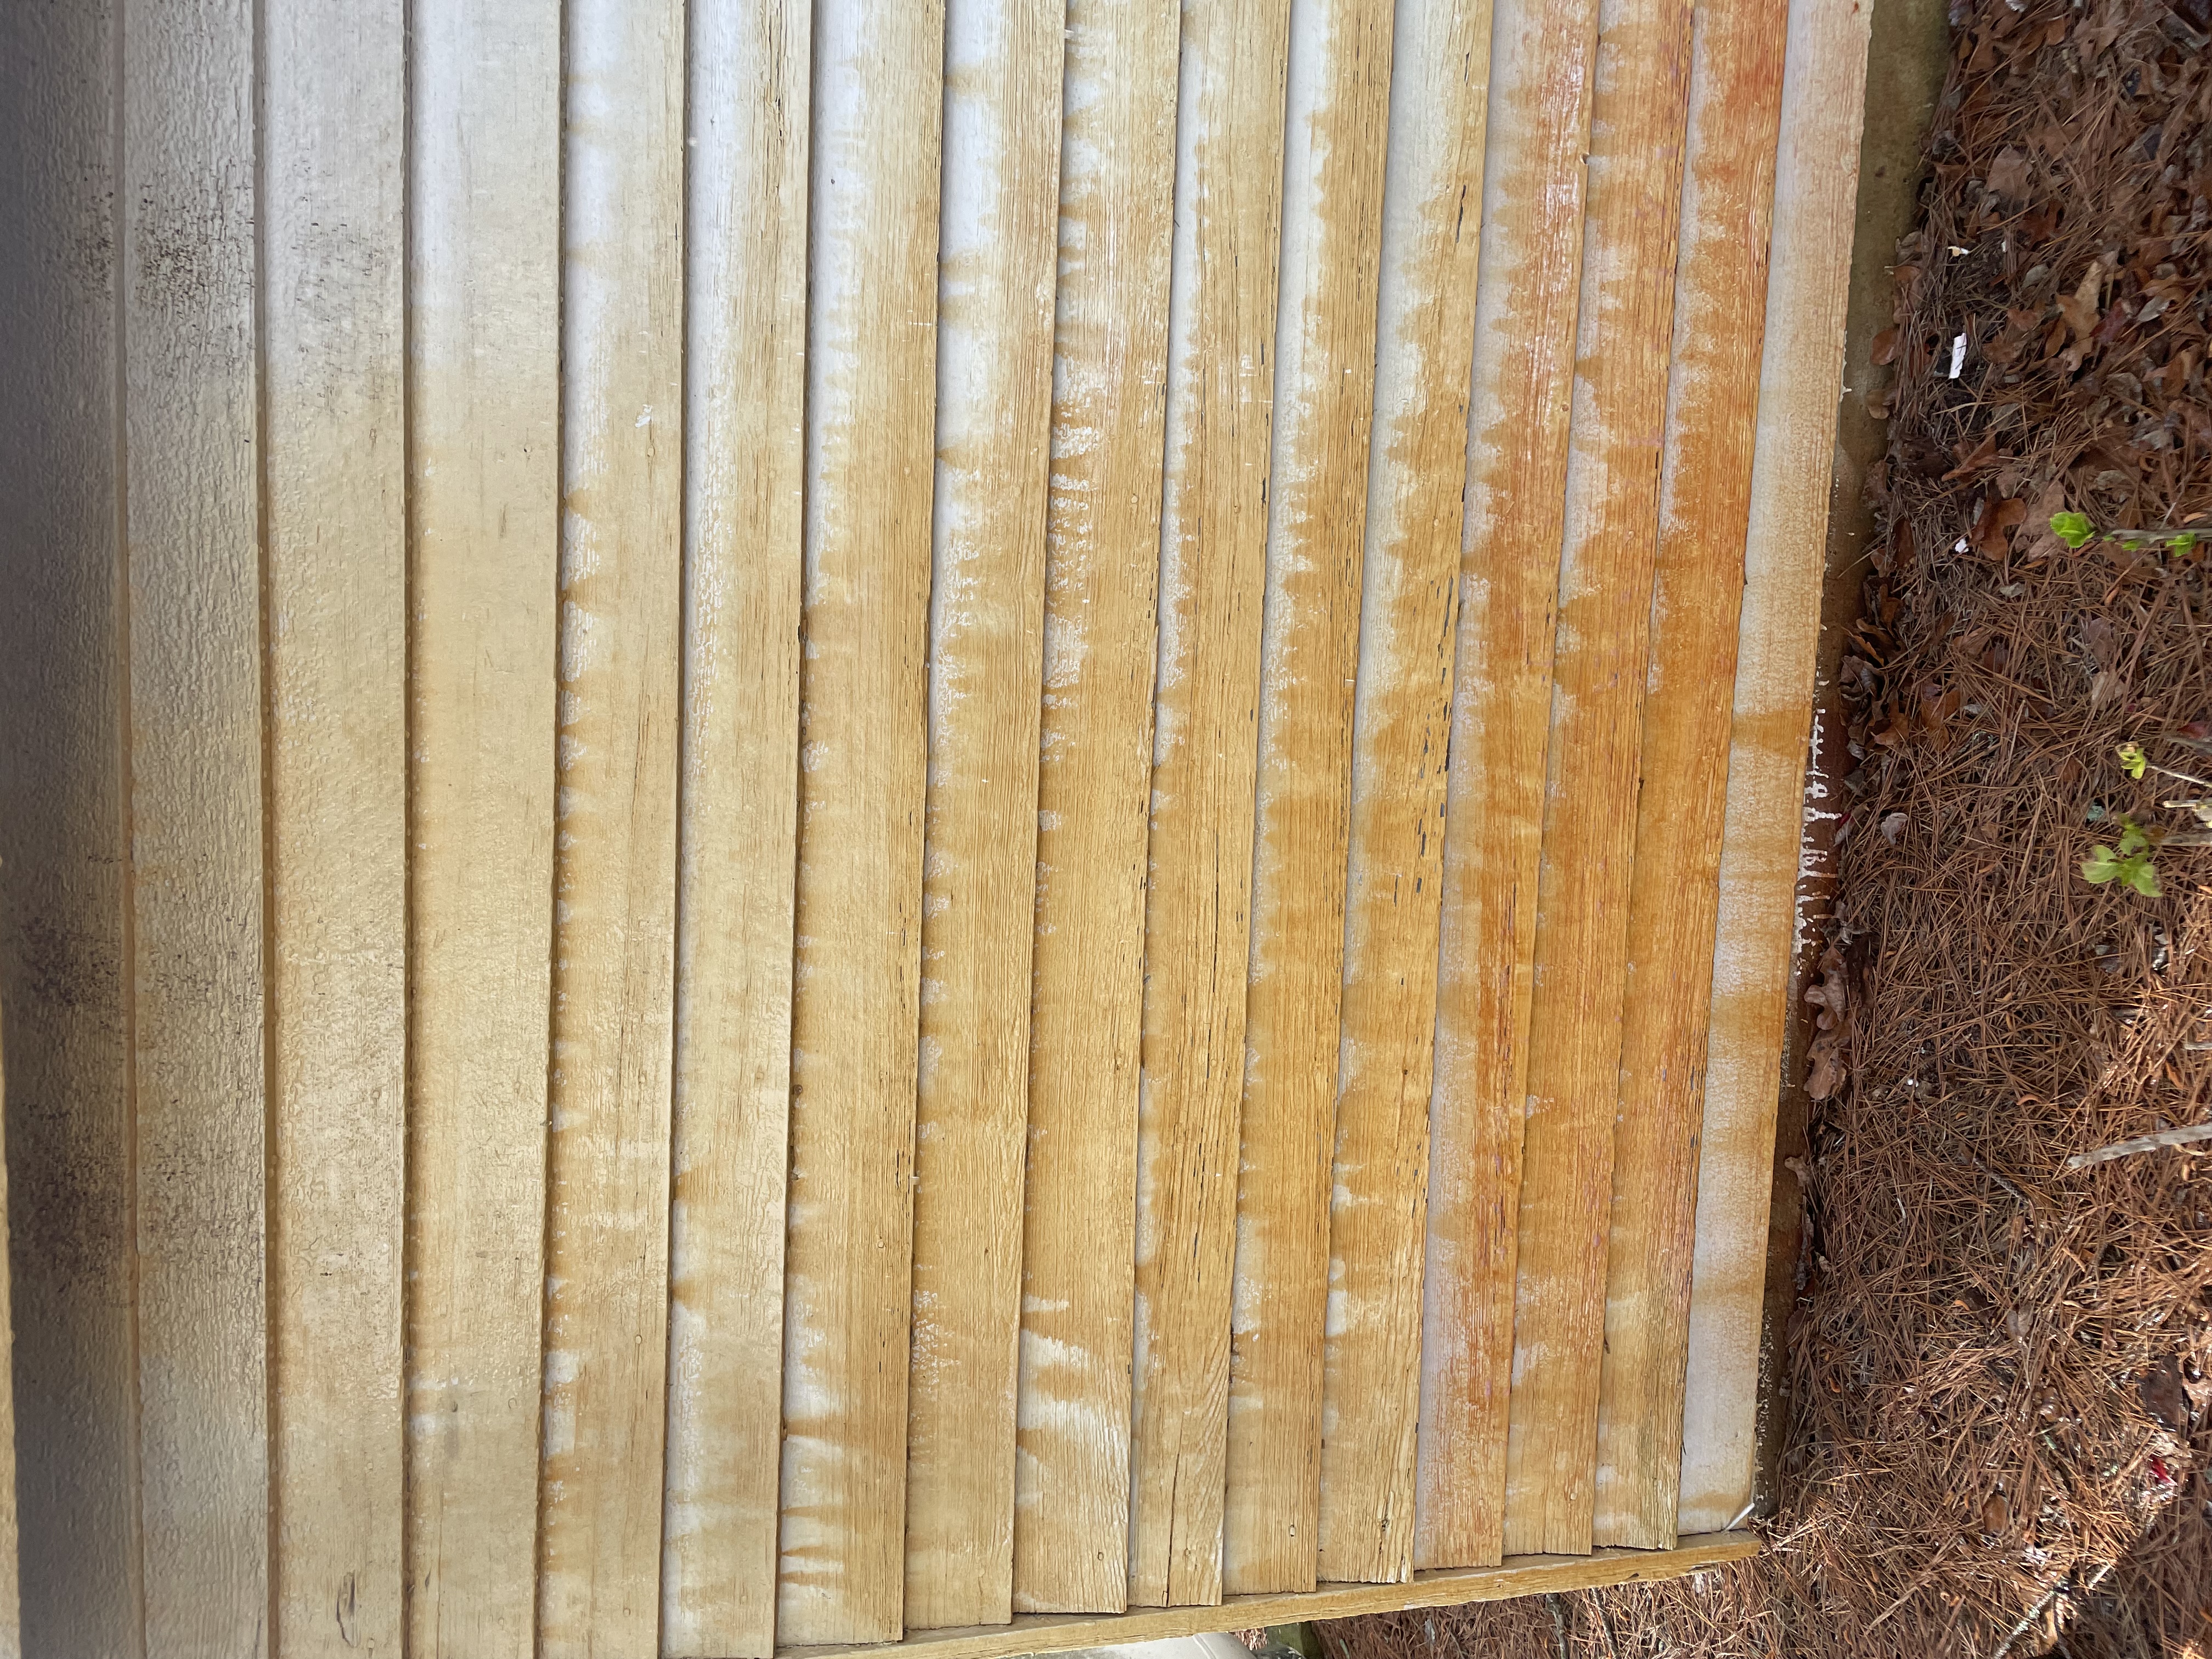 Rust Removal Results After a Professional House Washing in Smithfield, NC